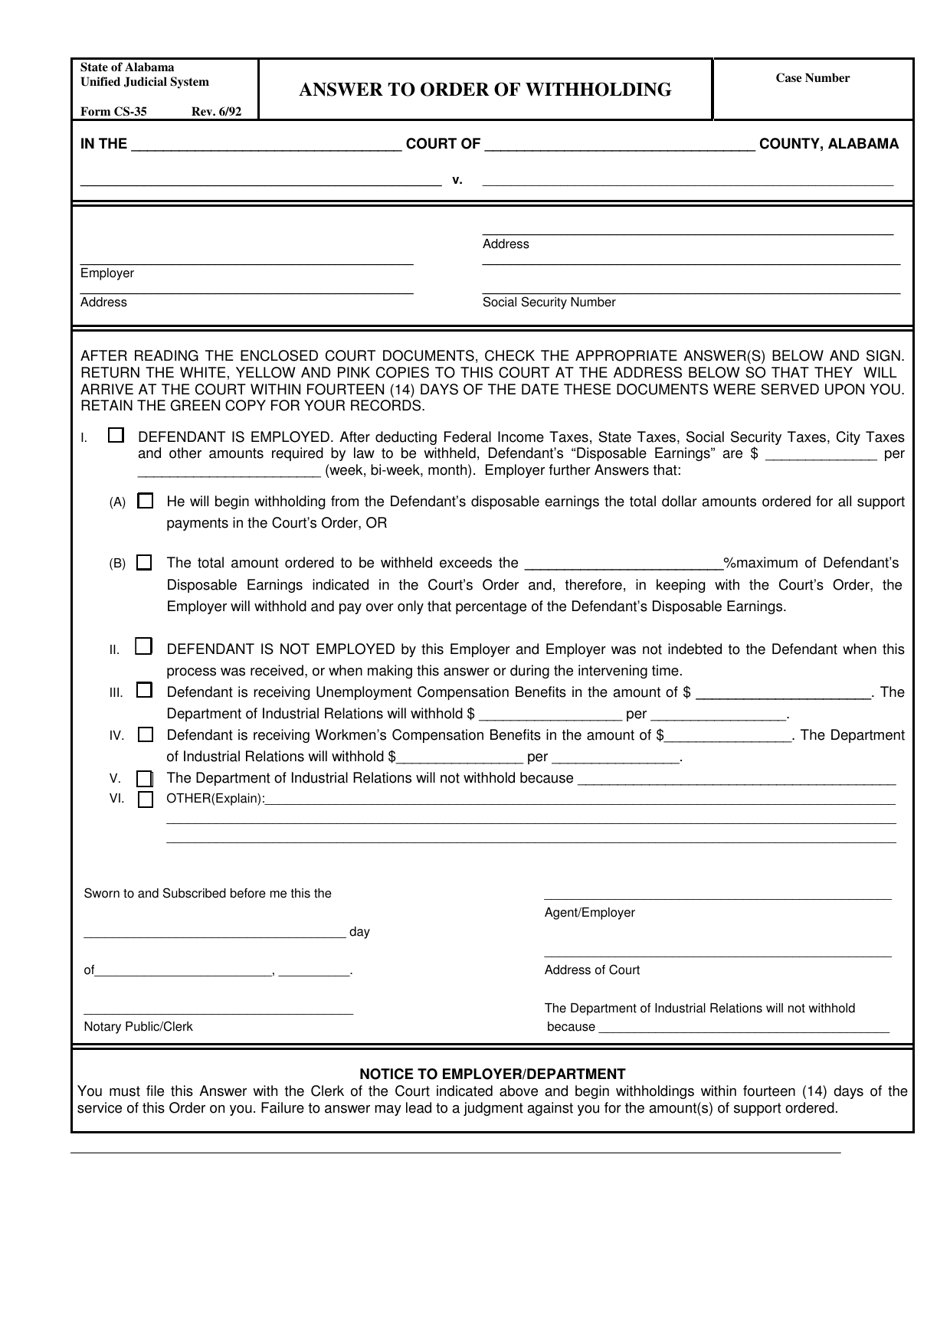 Form CS-35 Answer to Order of Withholding - Alabama, Page 1